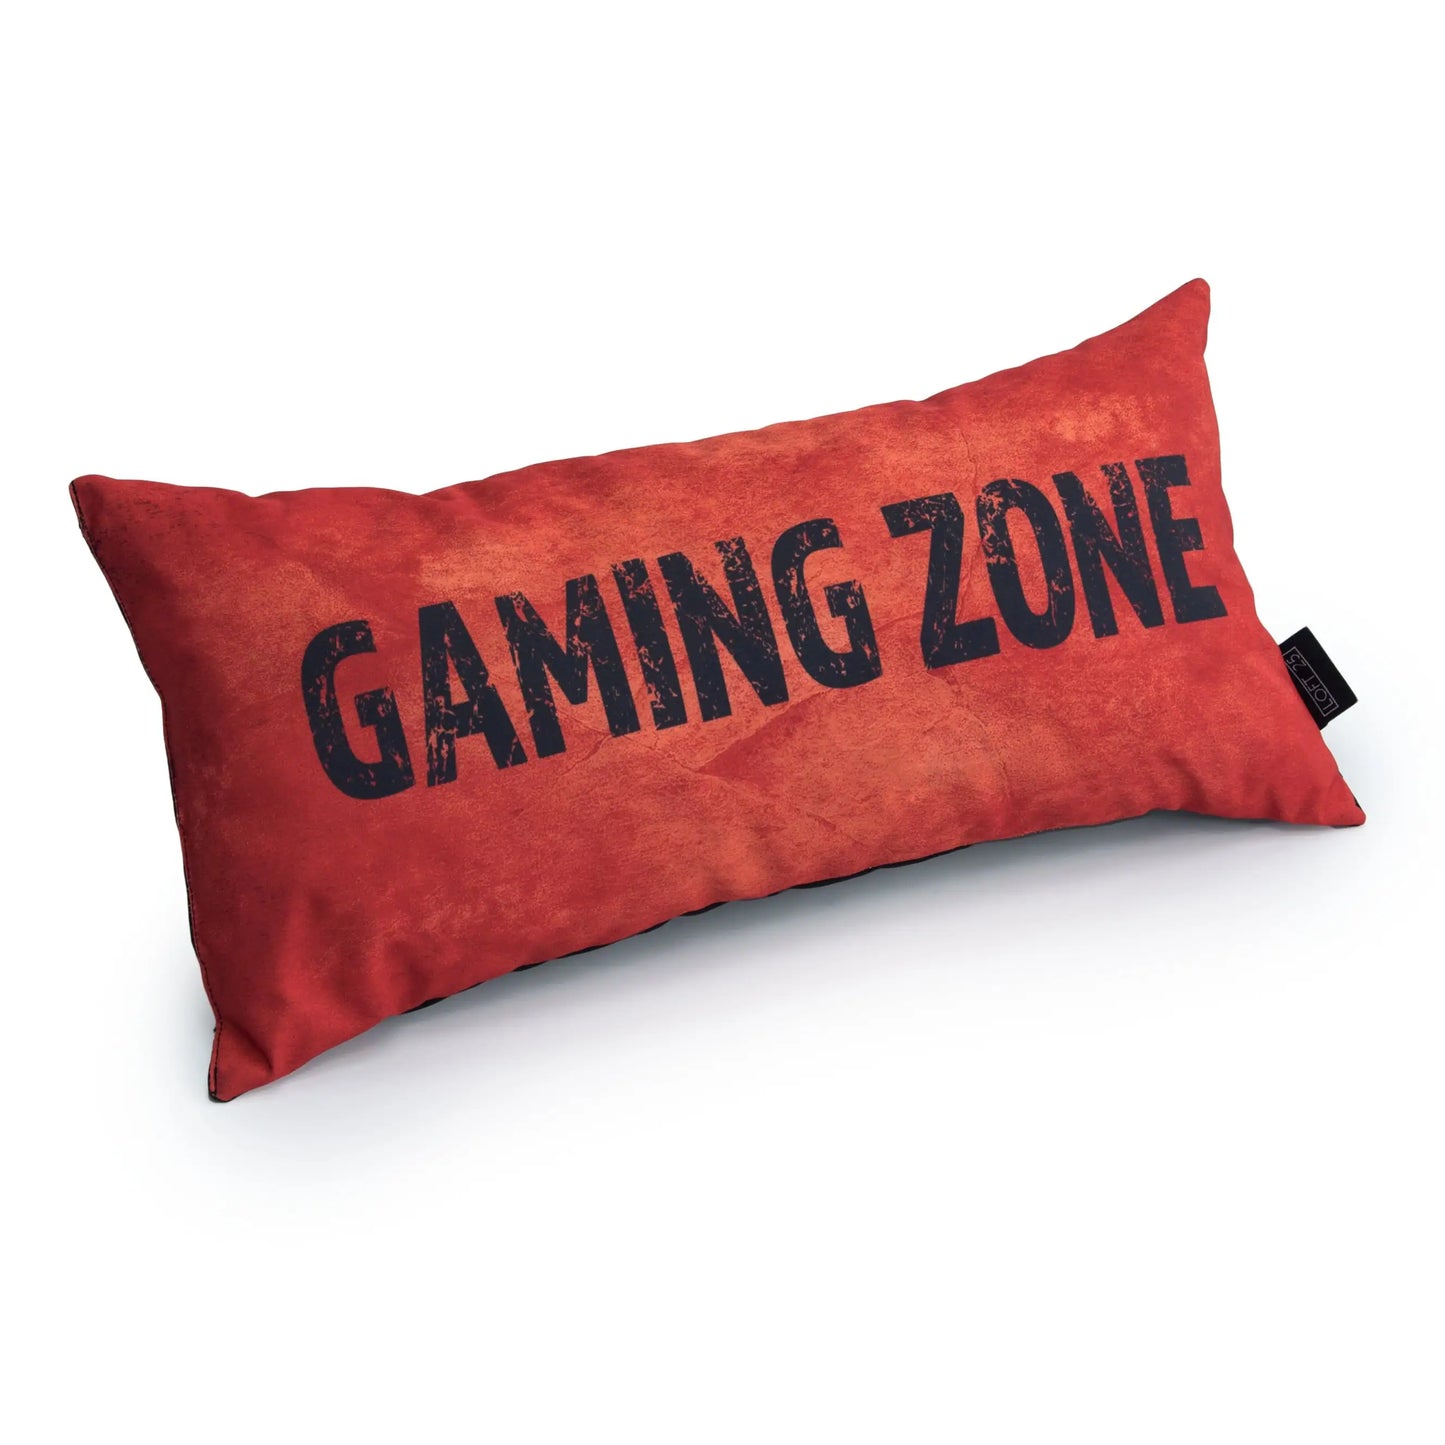 A orange pillow with the words "GAMING ZONE" written on it in white.